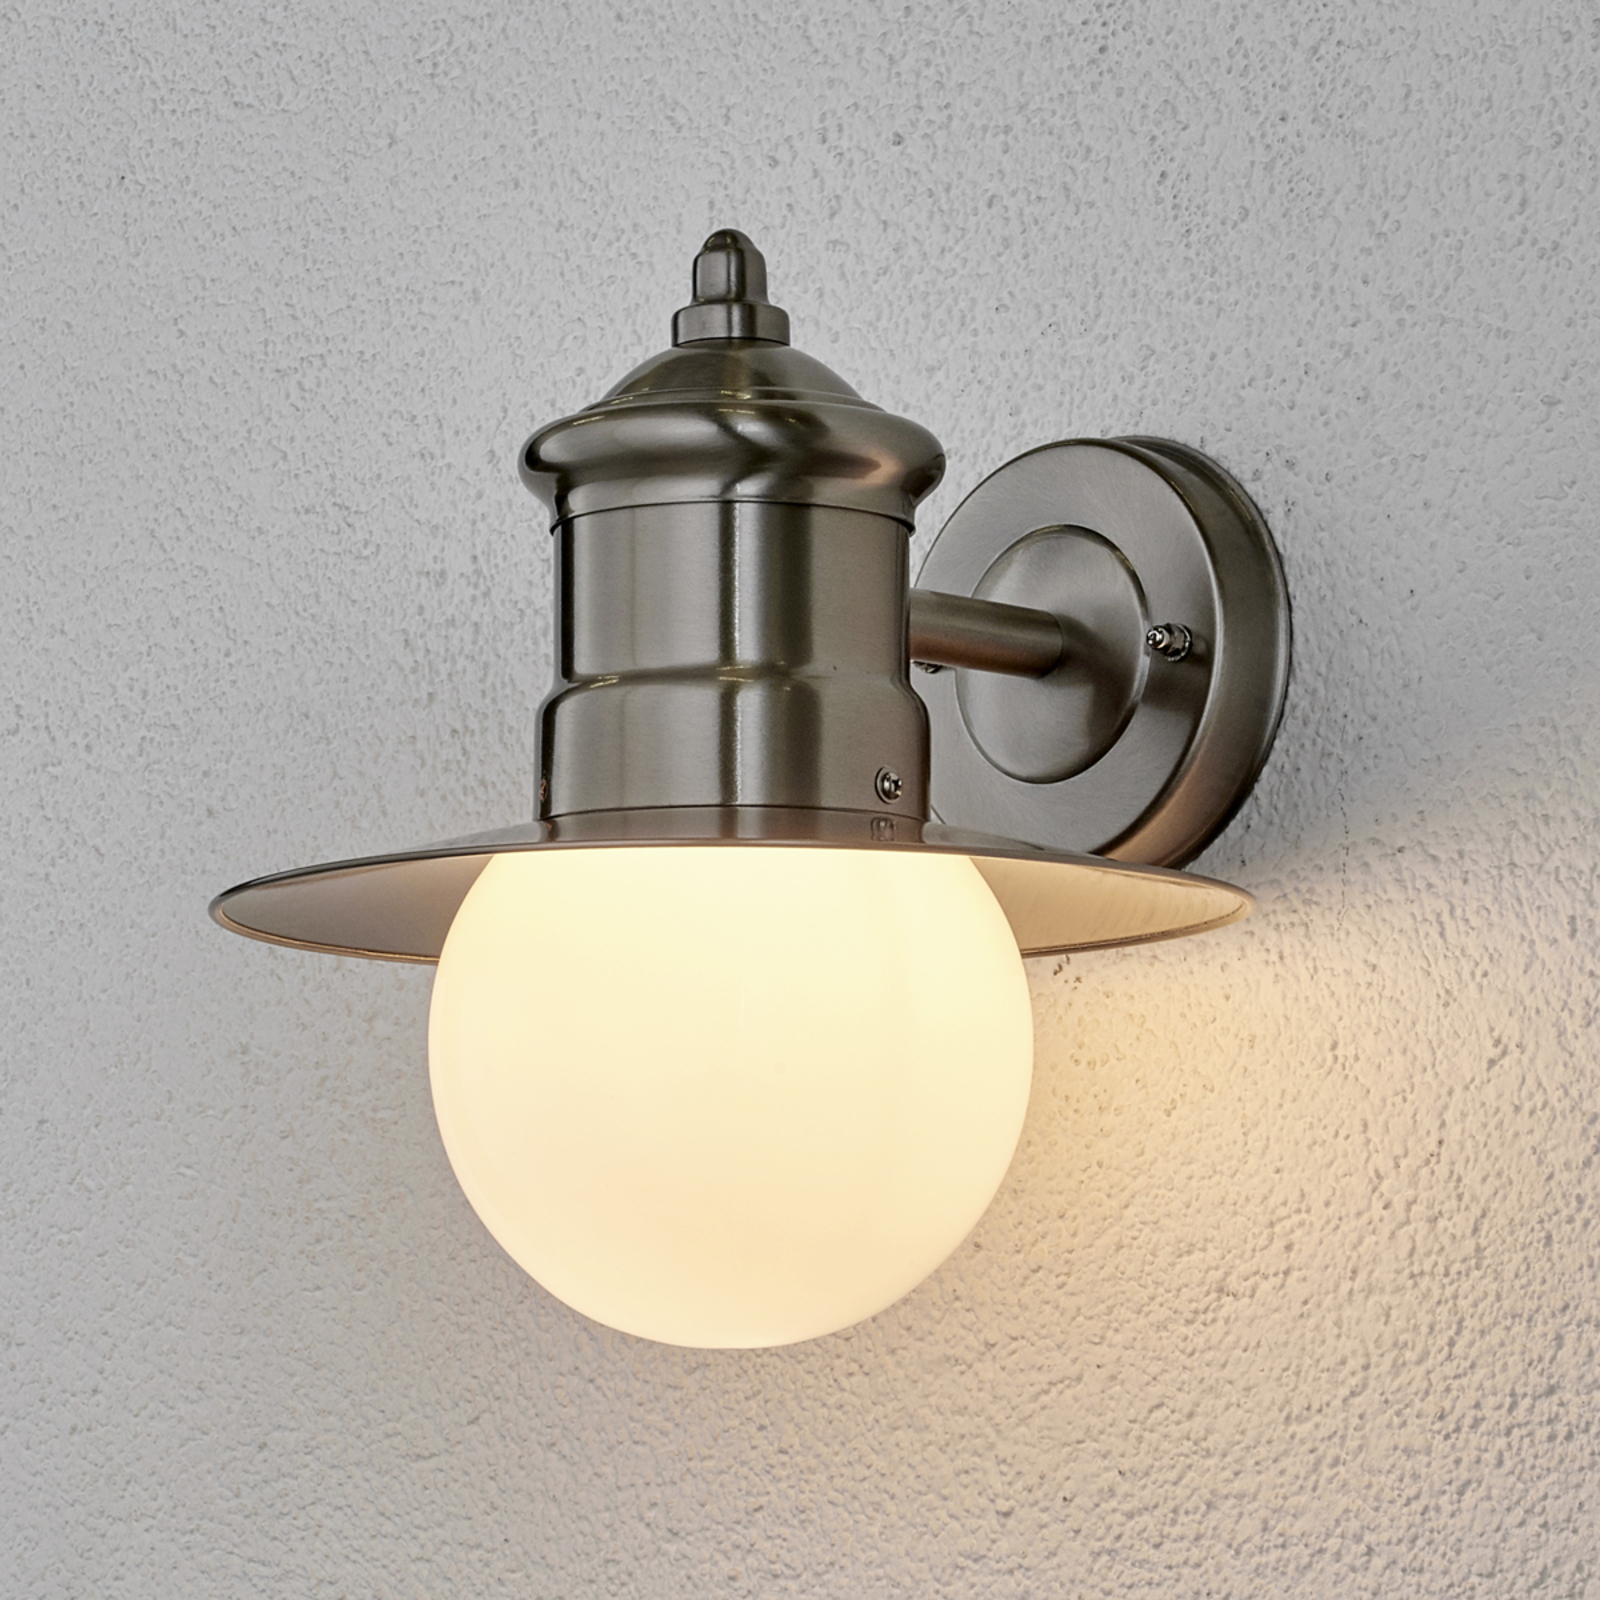 Stainless steel wall light for outdoors